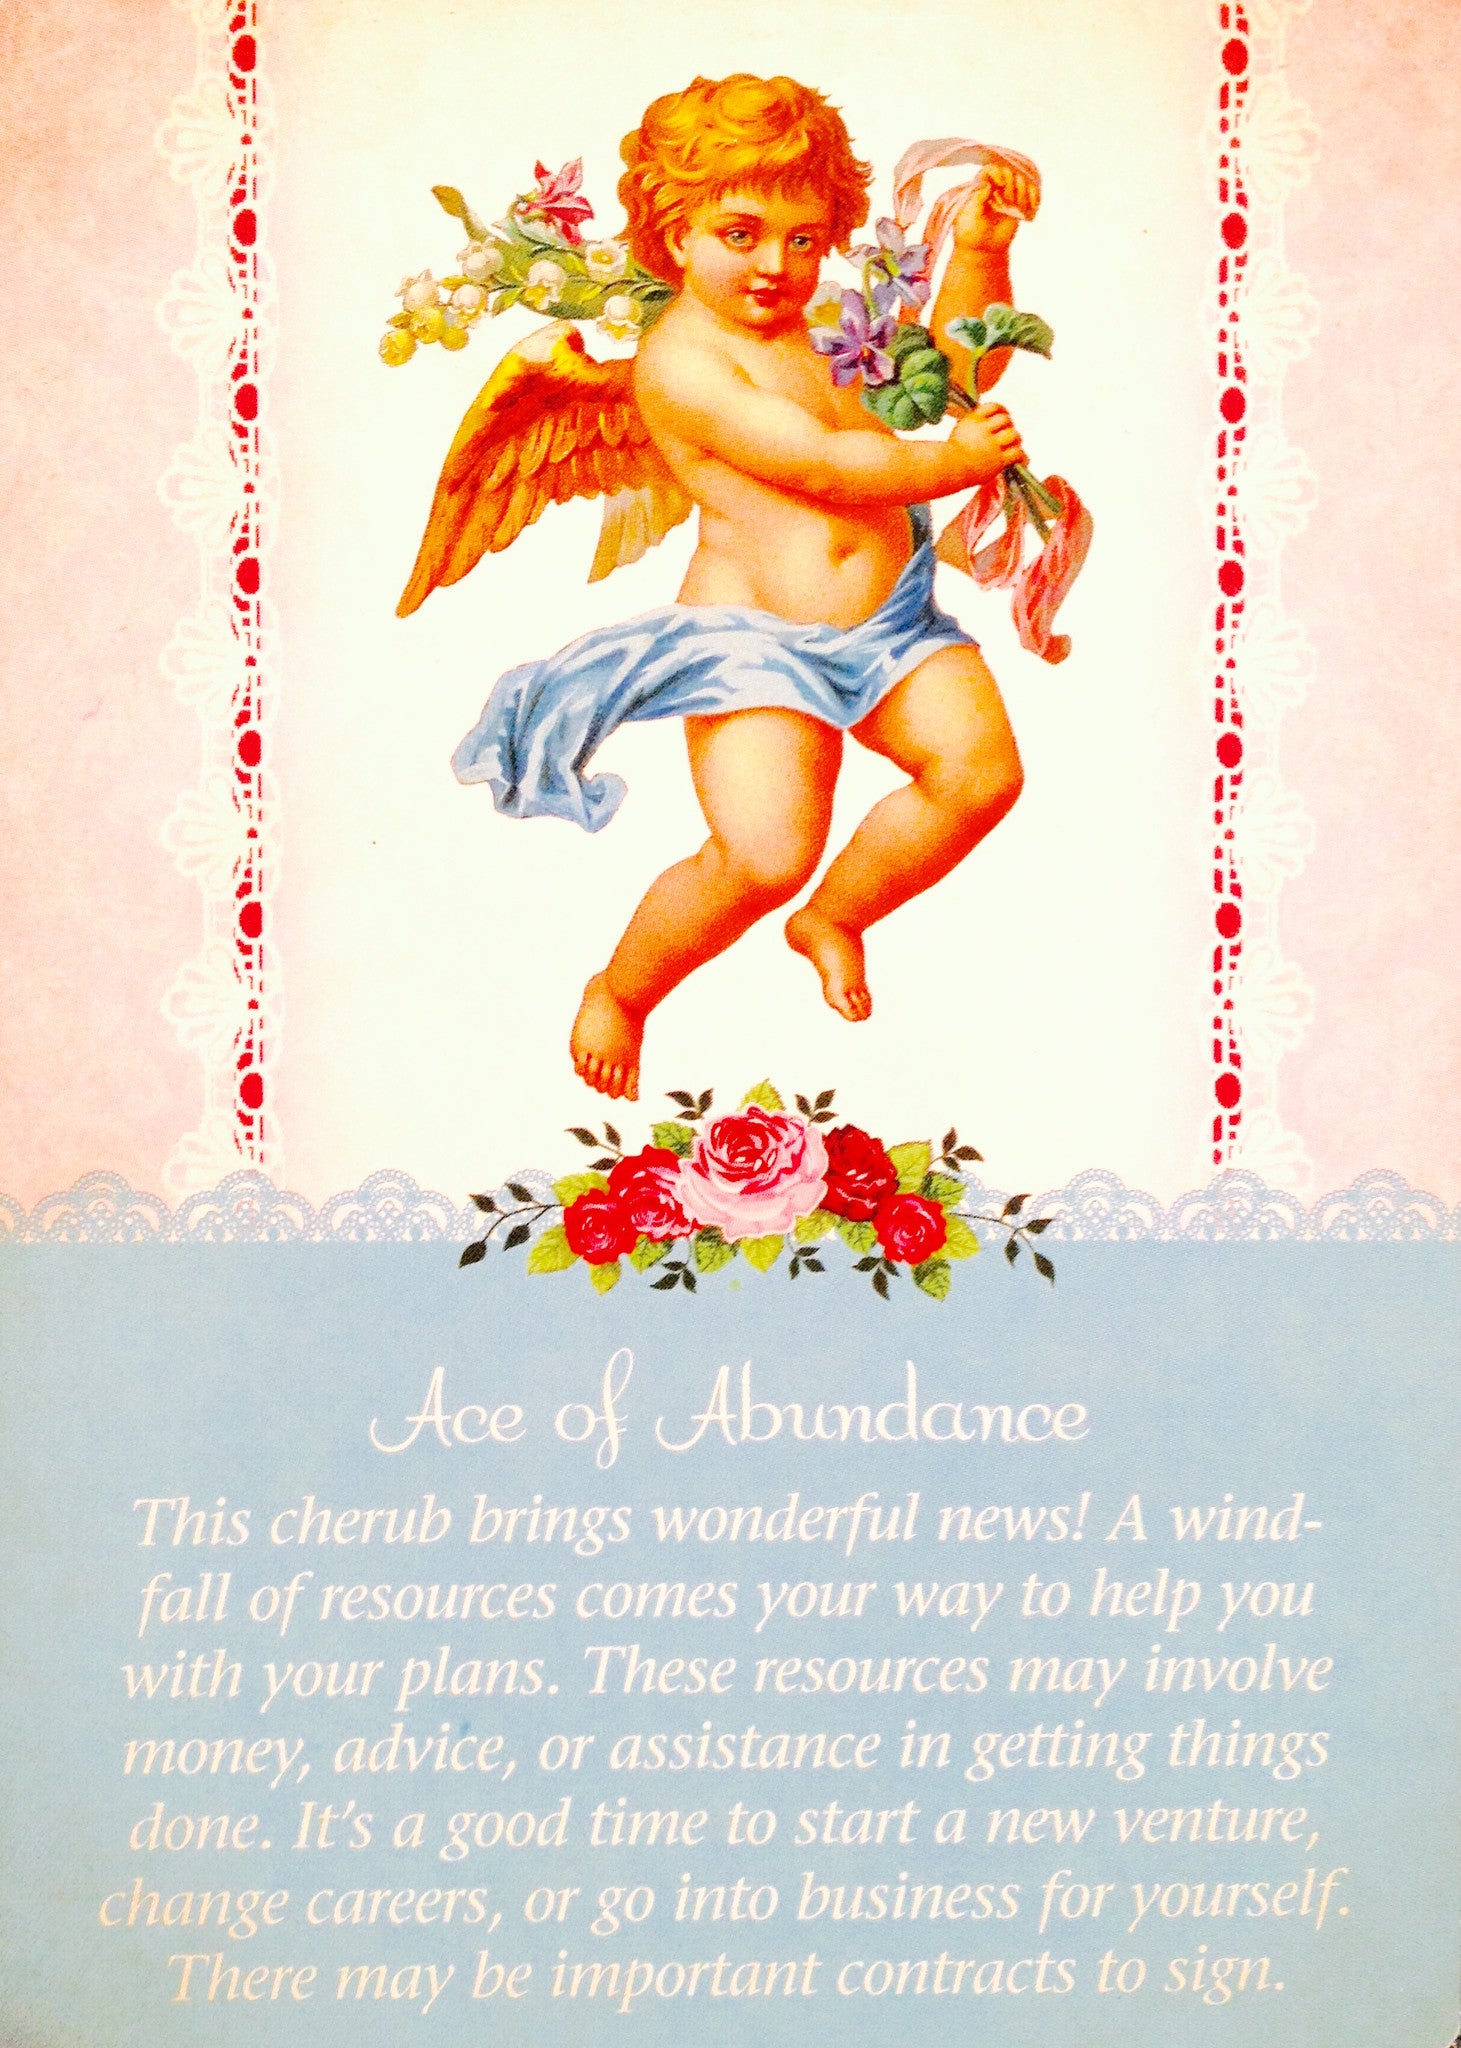 Ace Of Abundance: “This cherub brings wonderful news! A windfall of resources comes your way to hep you with your plans.